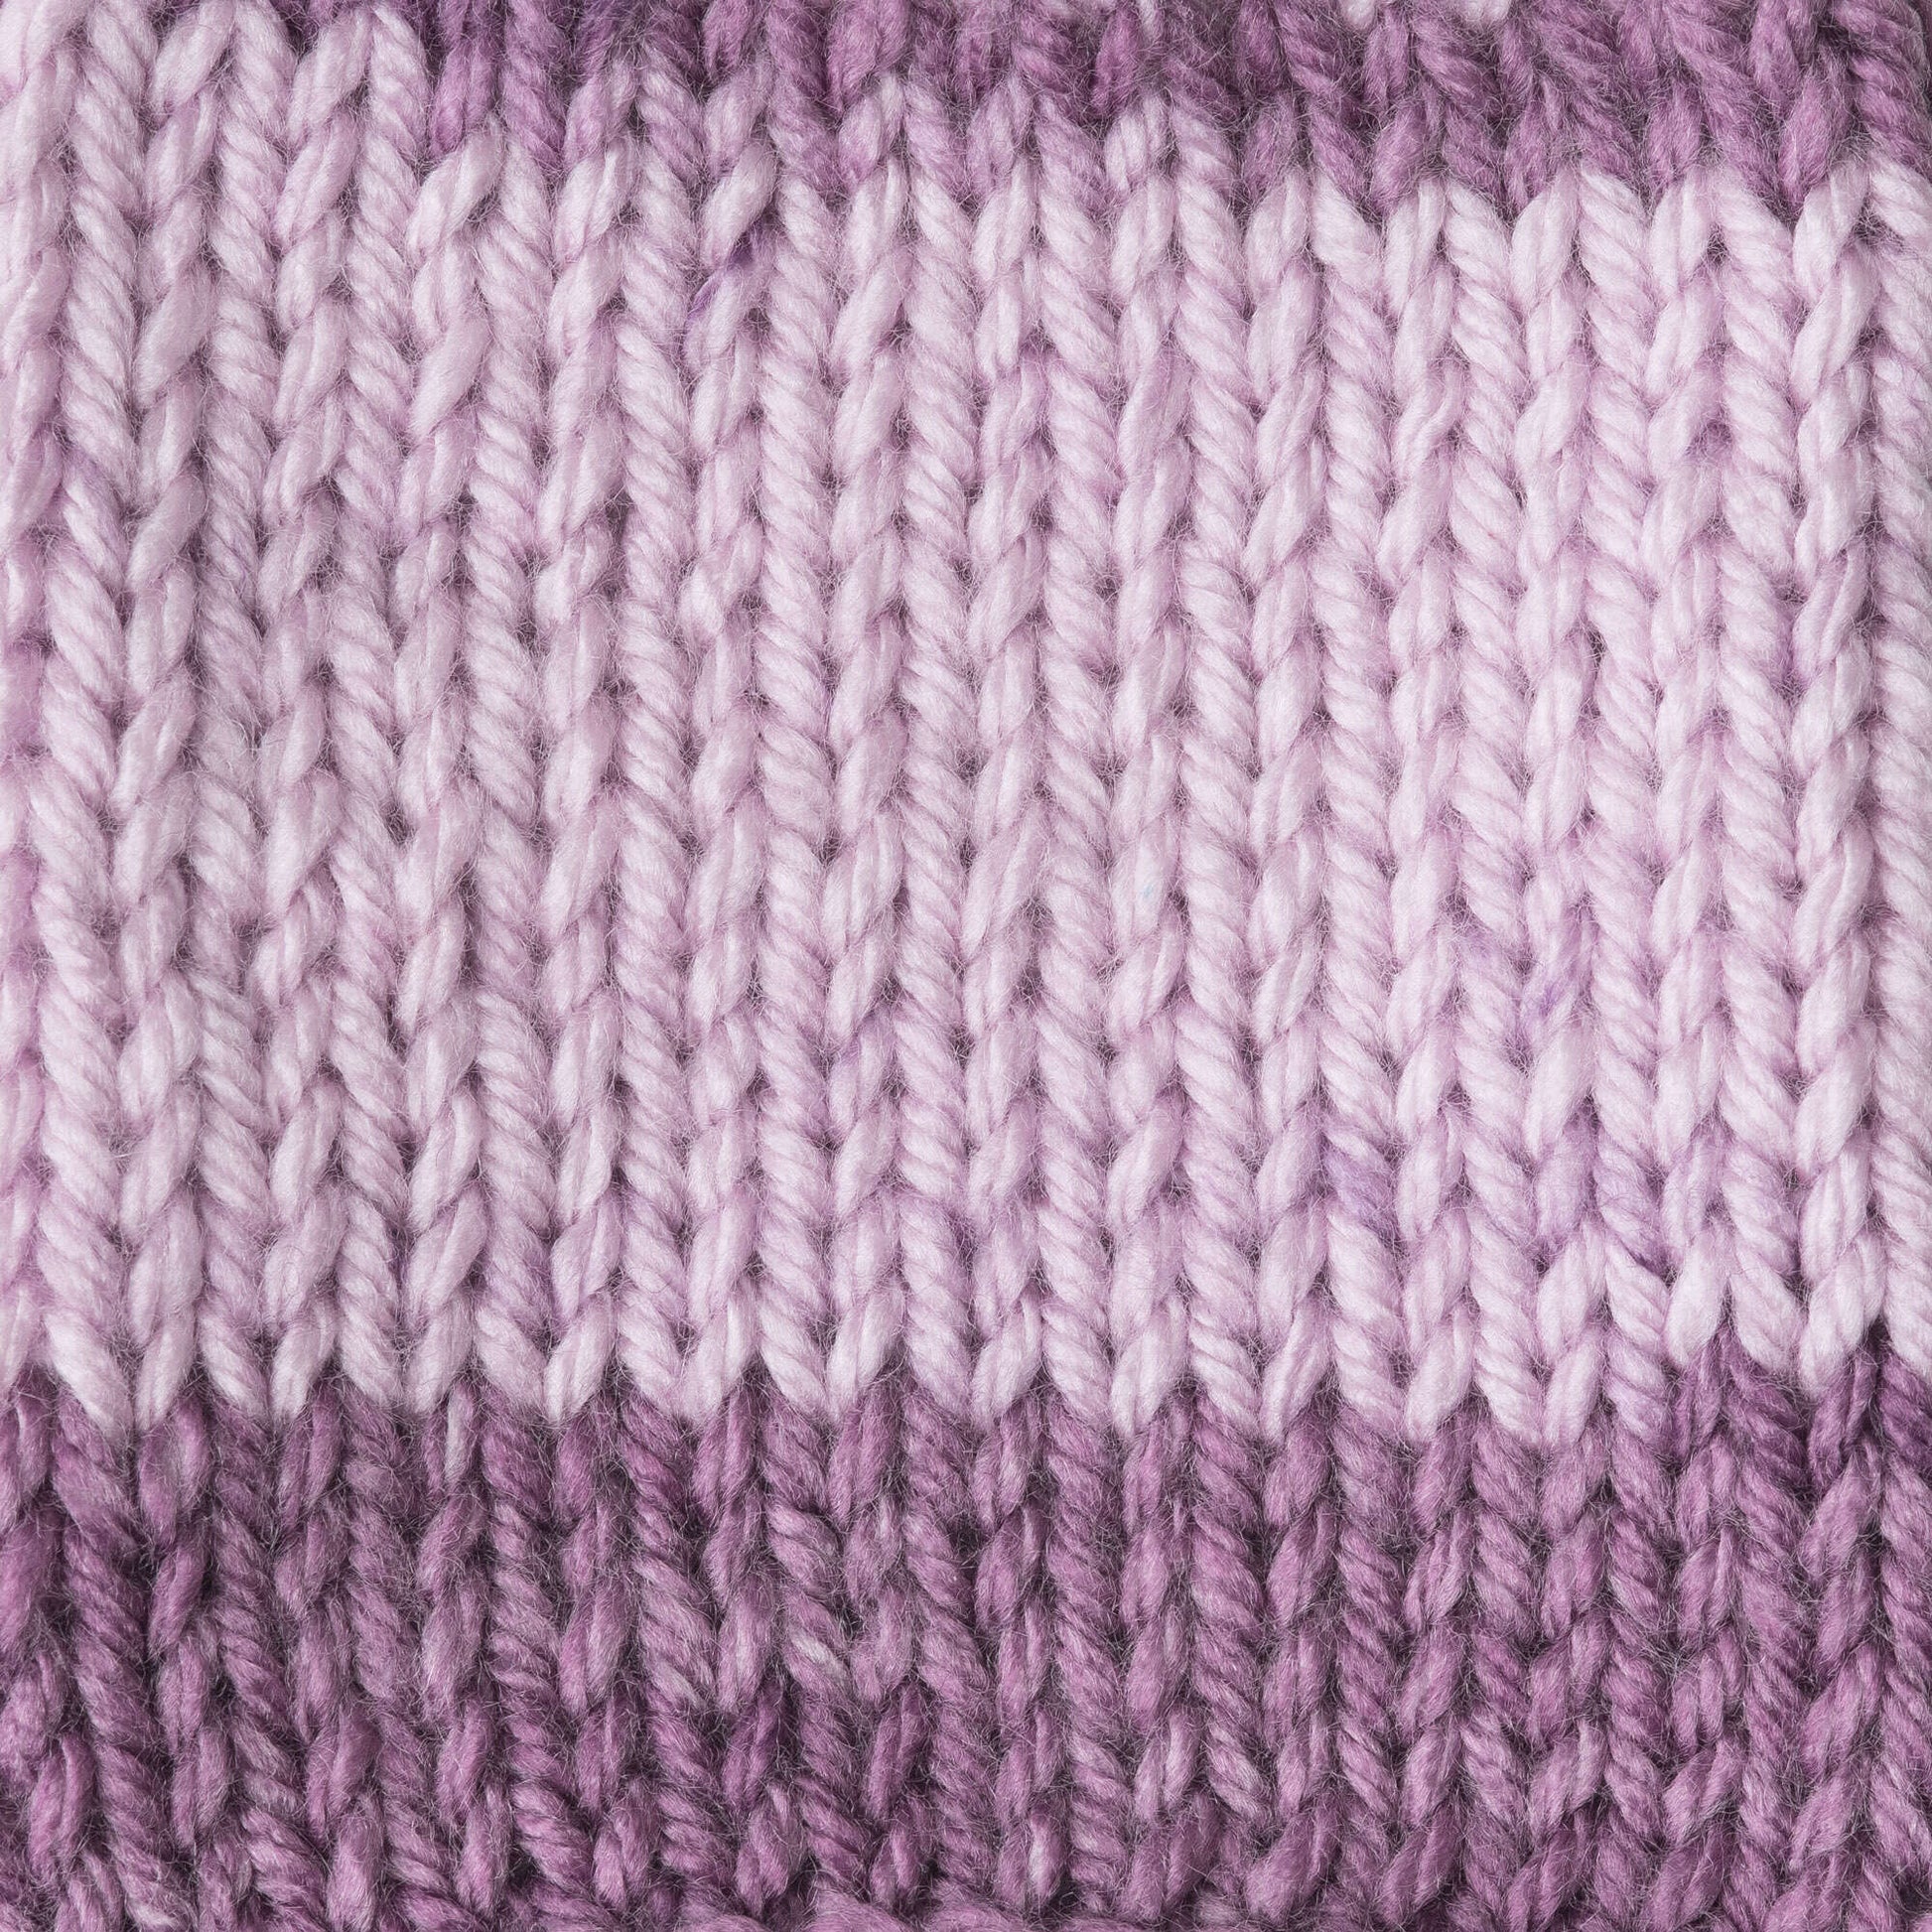 Caron Simply Soft Ombres Yarn